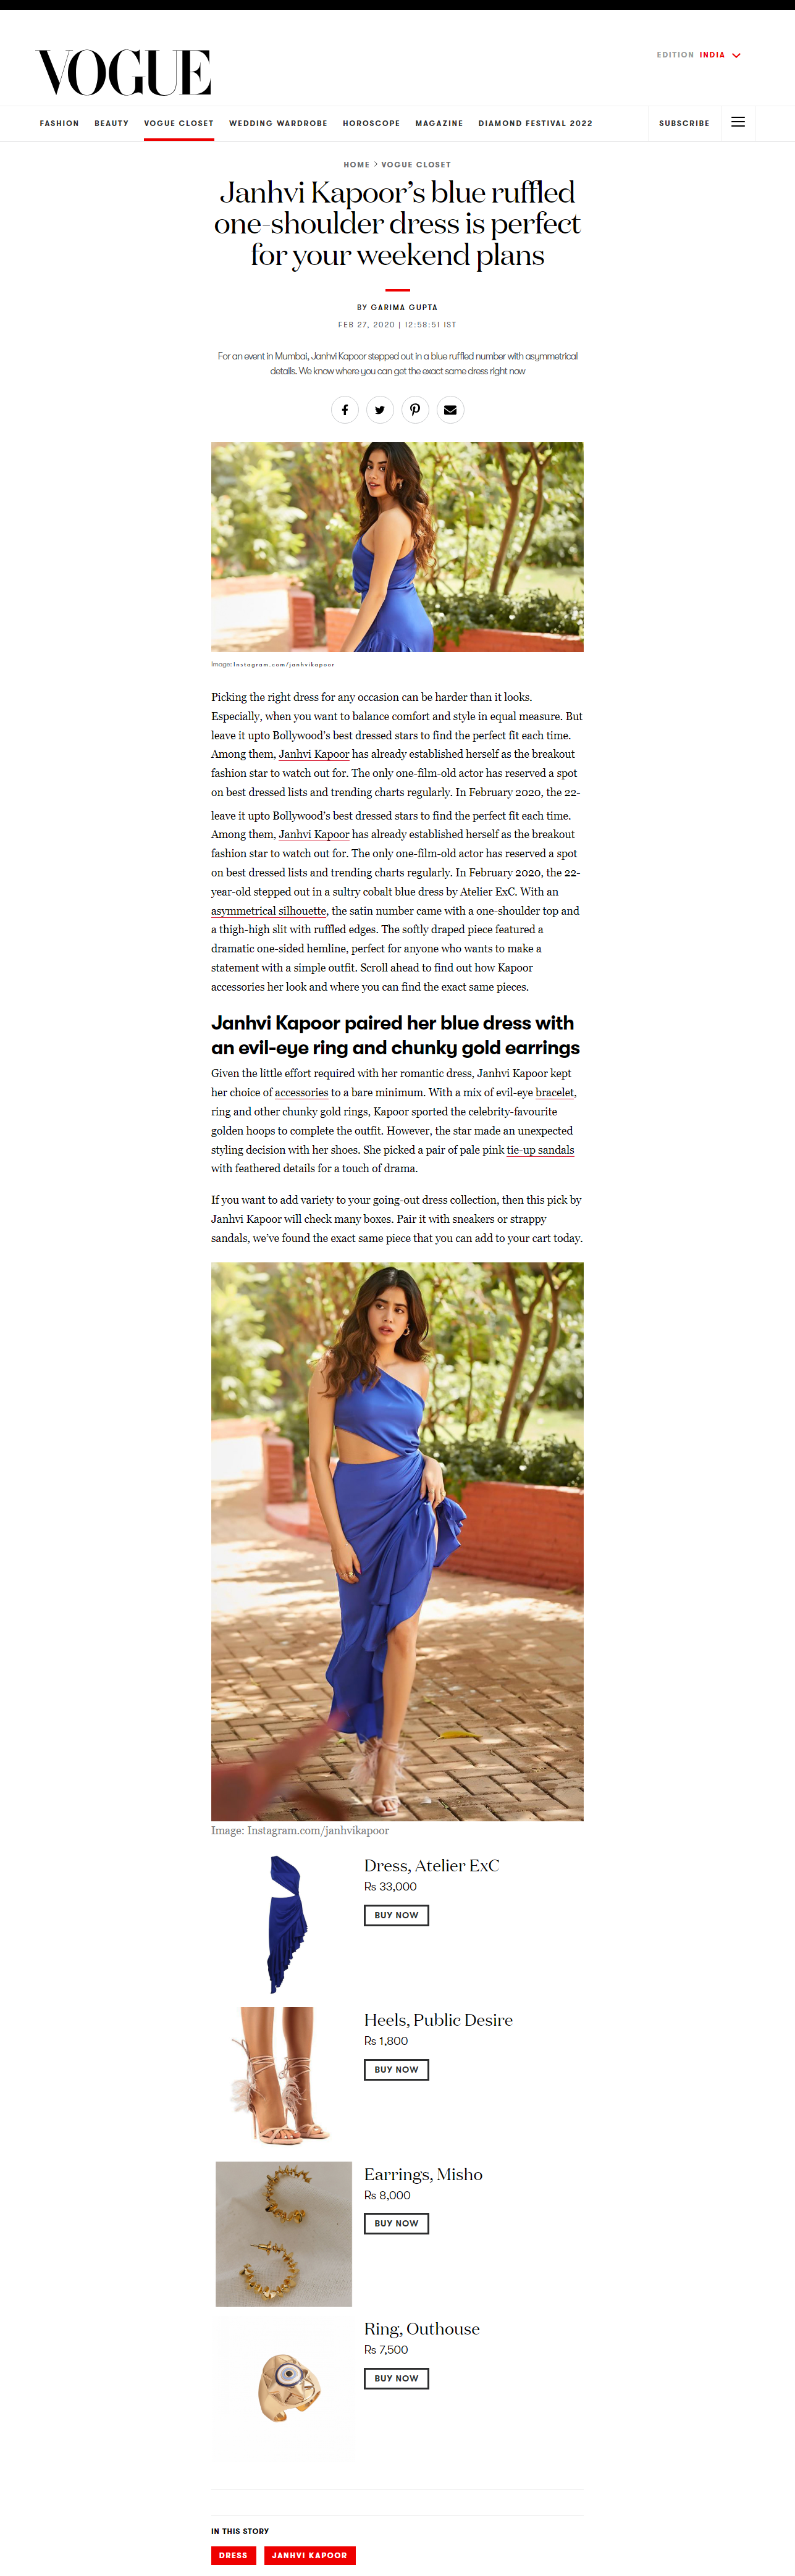 screencapture vogue in vogue closet collection janhvi kapoor ruffled blue thigh high slit and one shoulder dress weekend